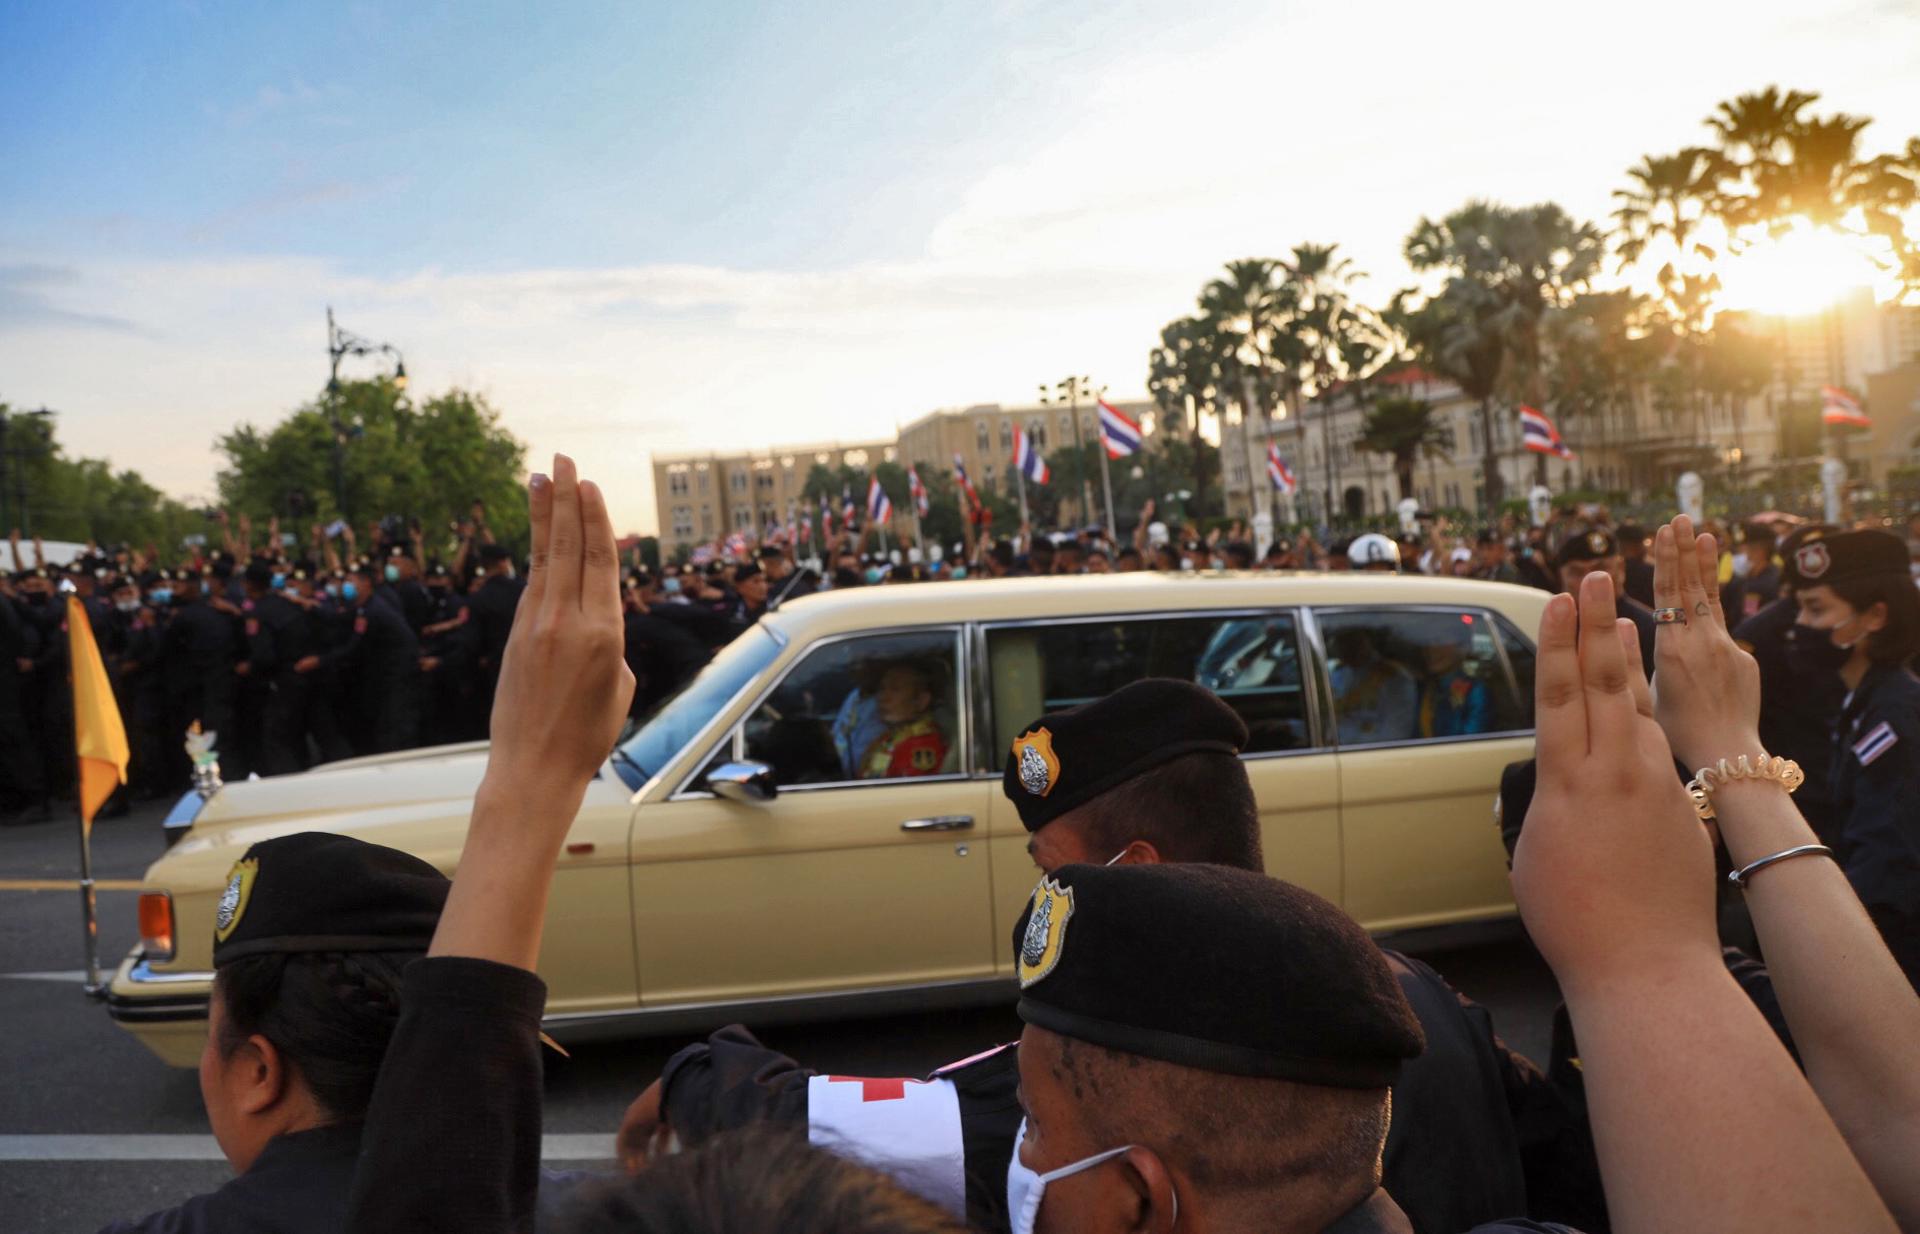 (FILE) Thai protesters flash the three-finger salute as the motorcade carrying Thailand's Queen Suthida drive past during an anti-government protest in Bangkok, Thailand, 14 October 2020. EFE/EPA/STR